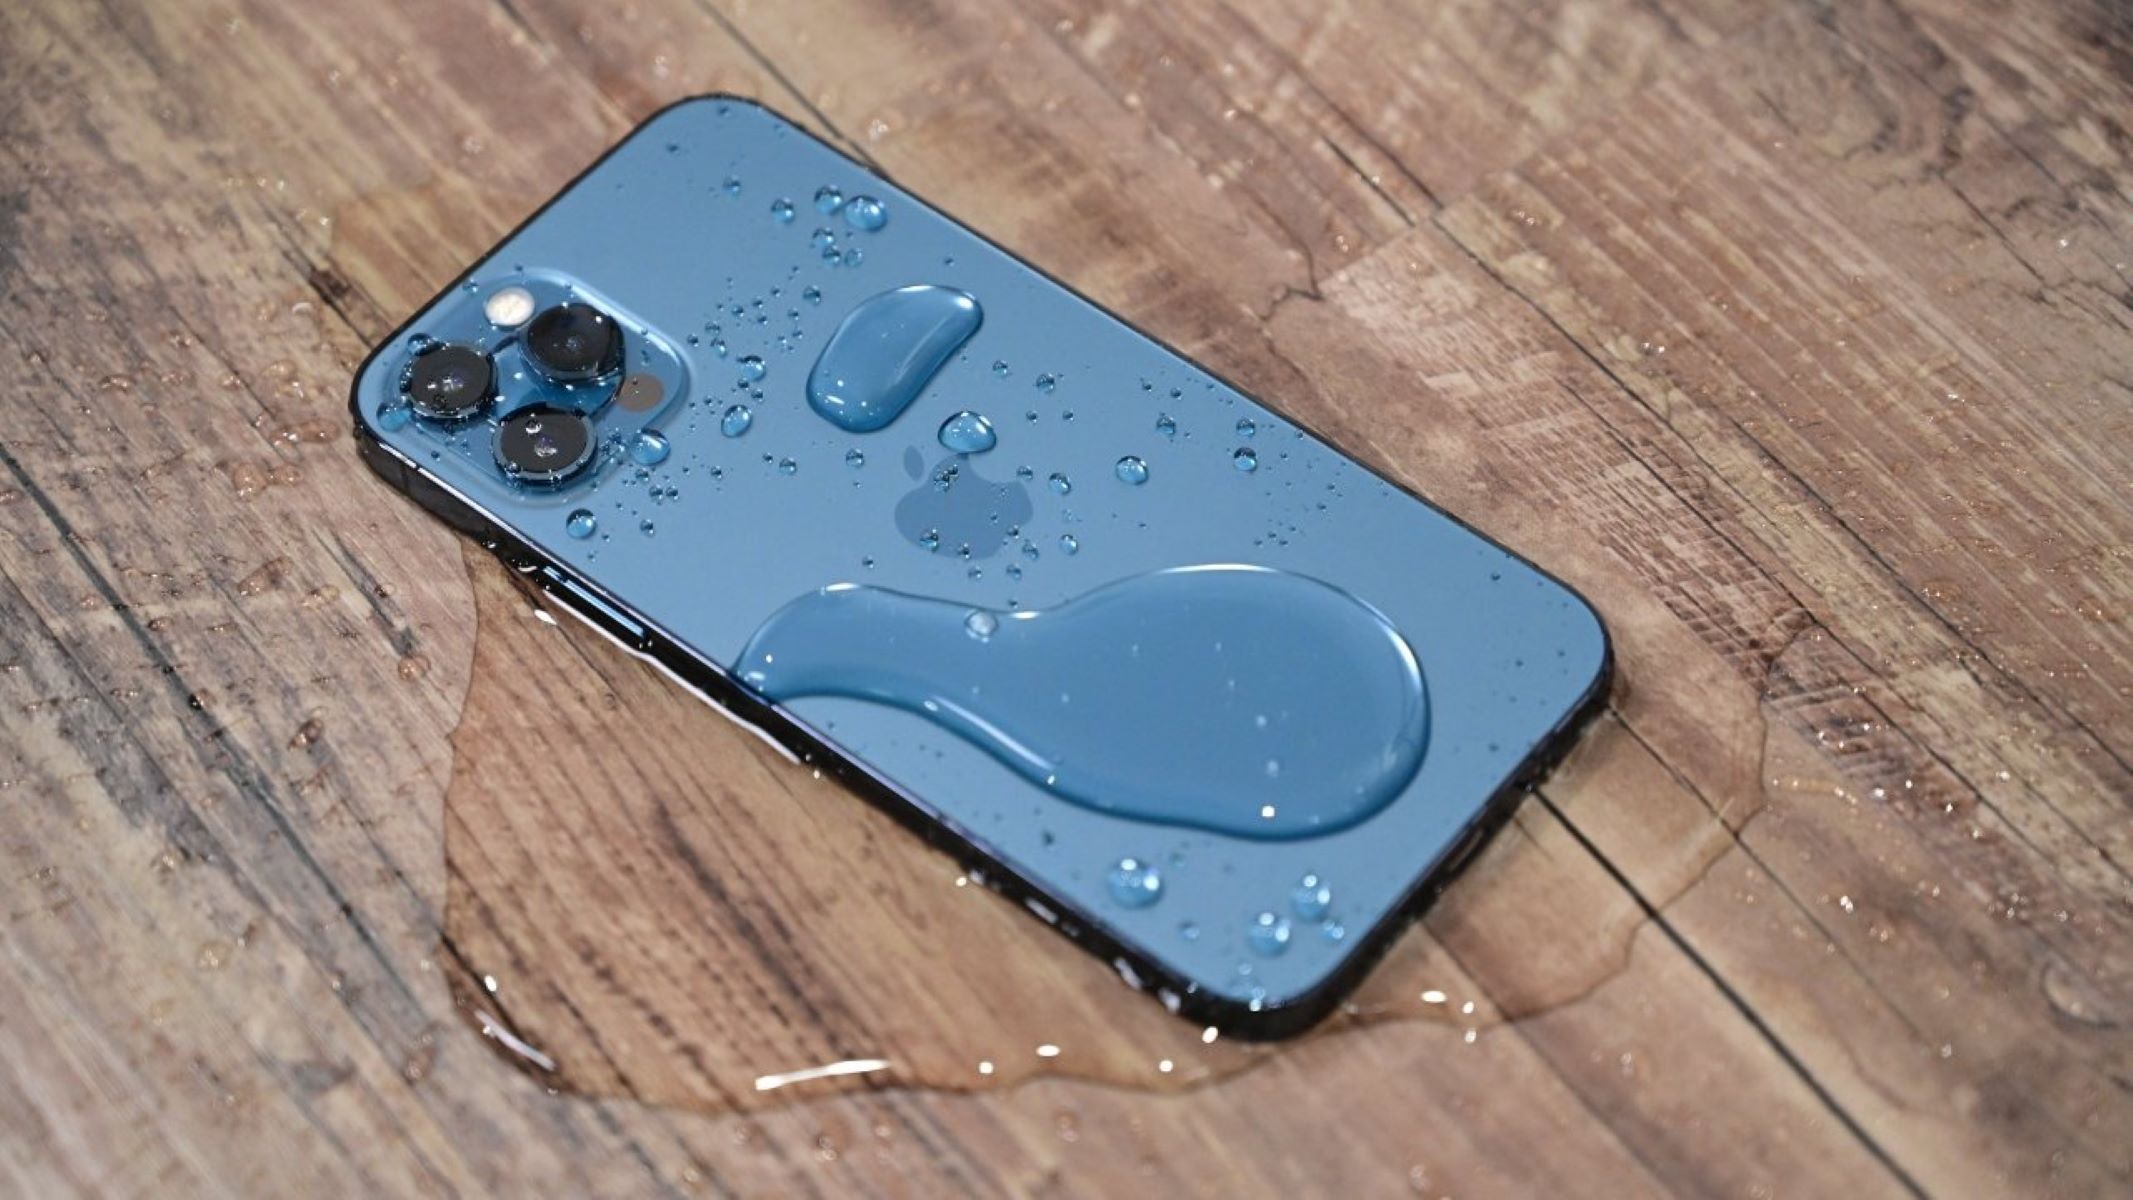 Steps To Take If IPhone 13 Is Dropped In Water